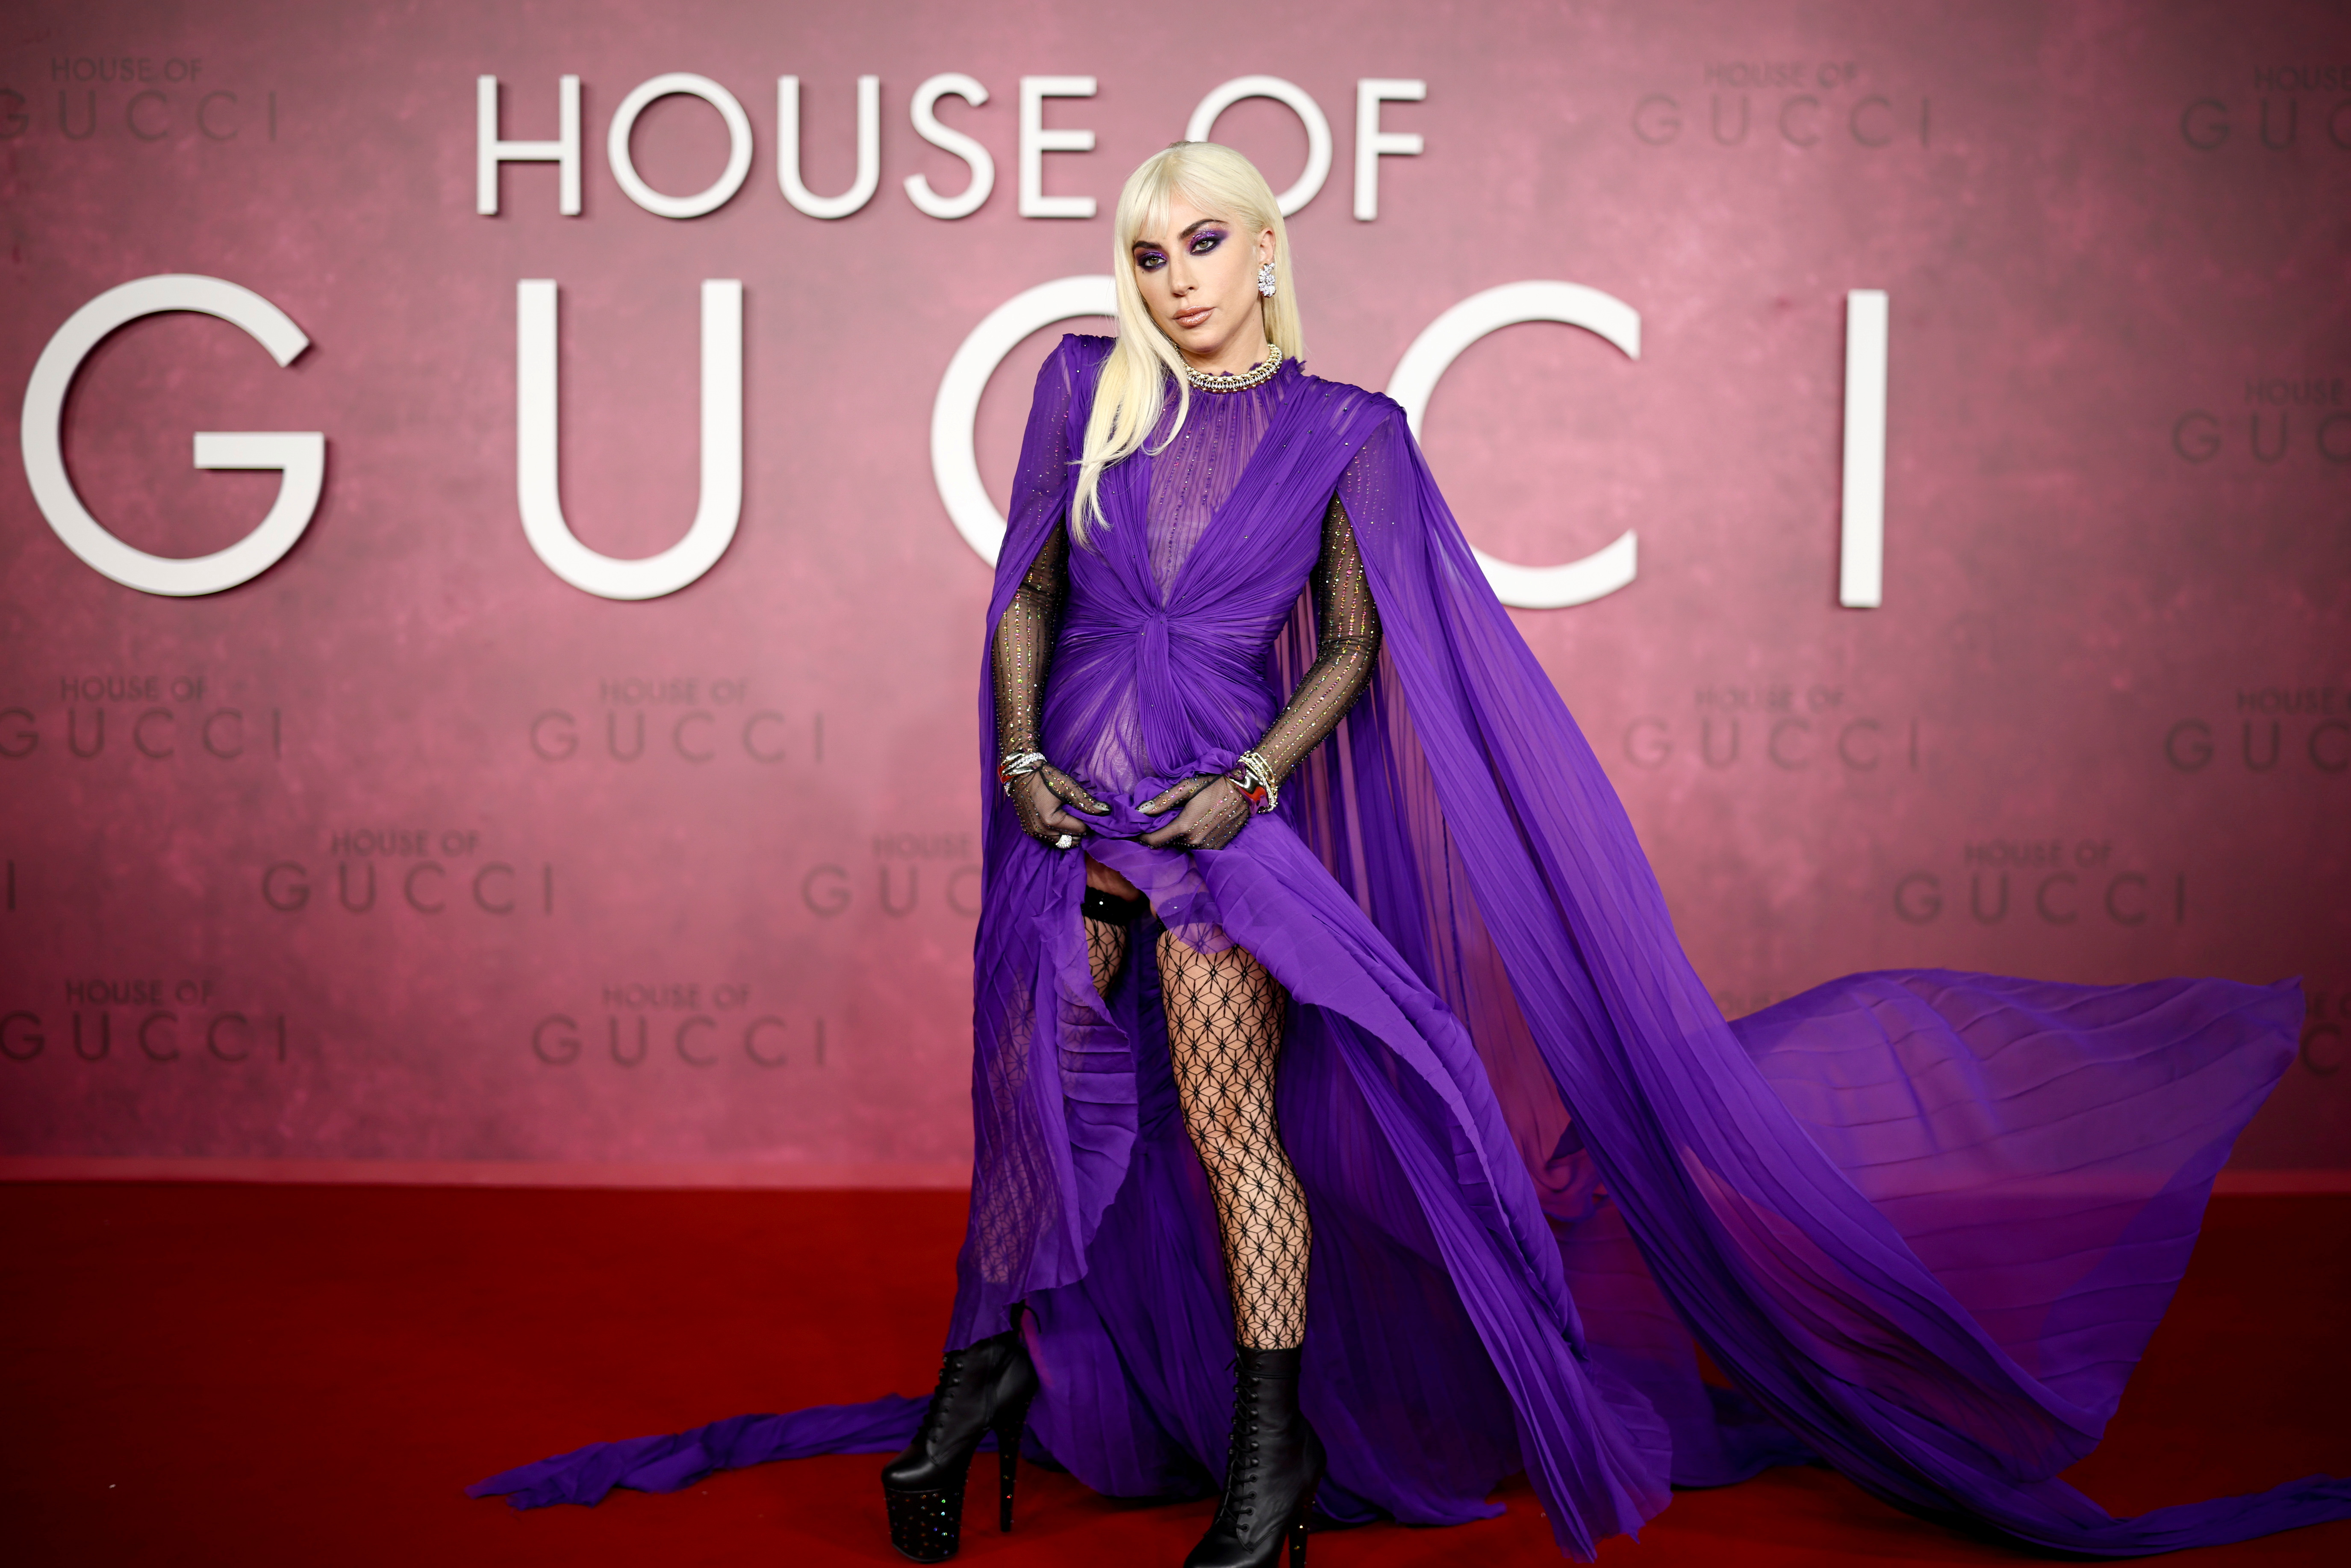 Cast member Lady Gaga arrives at the UK Premiere of the film 'House of Gucci' at Leicester Square in London, Britain, November 9, 2021. REUTERS/Henry Nicholls